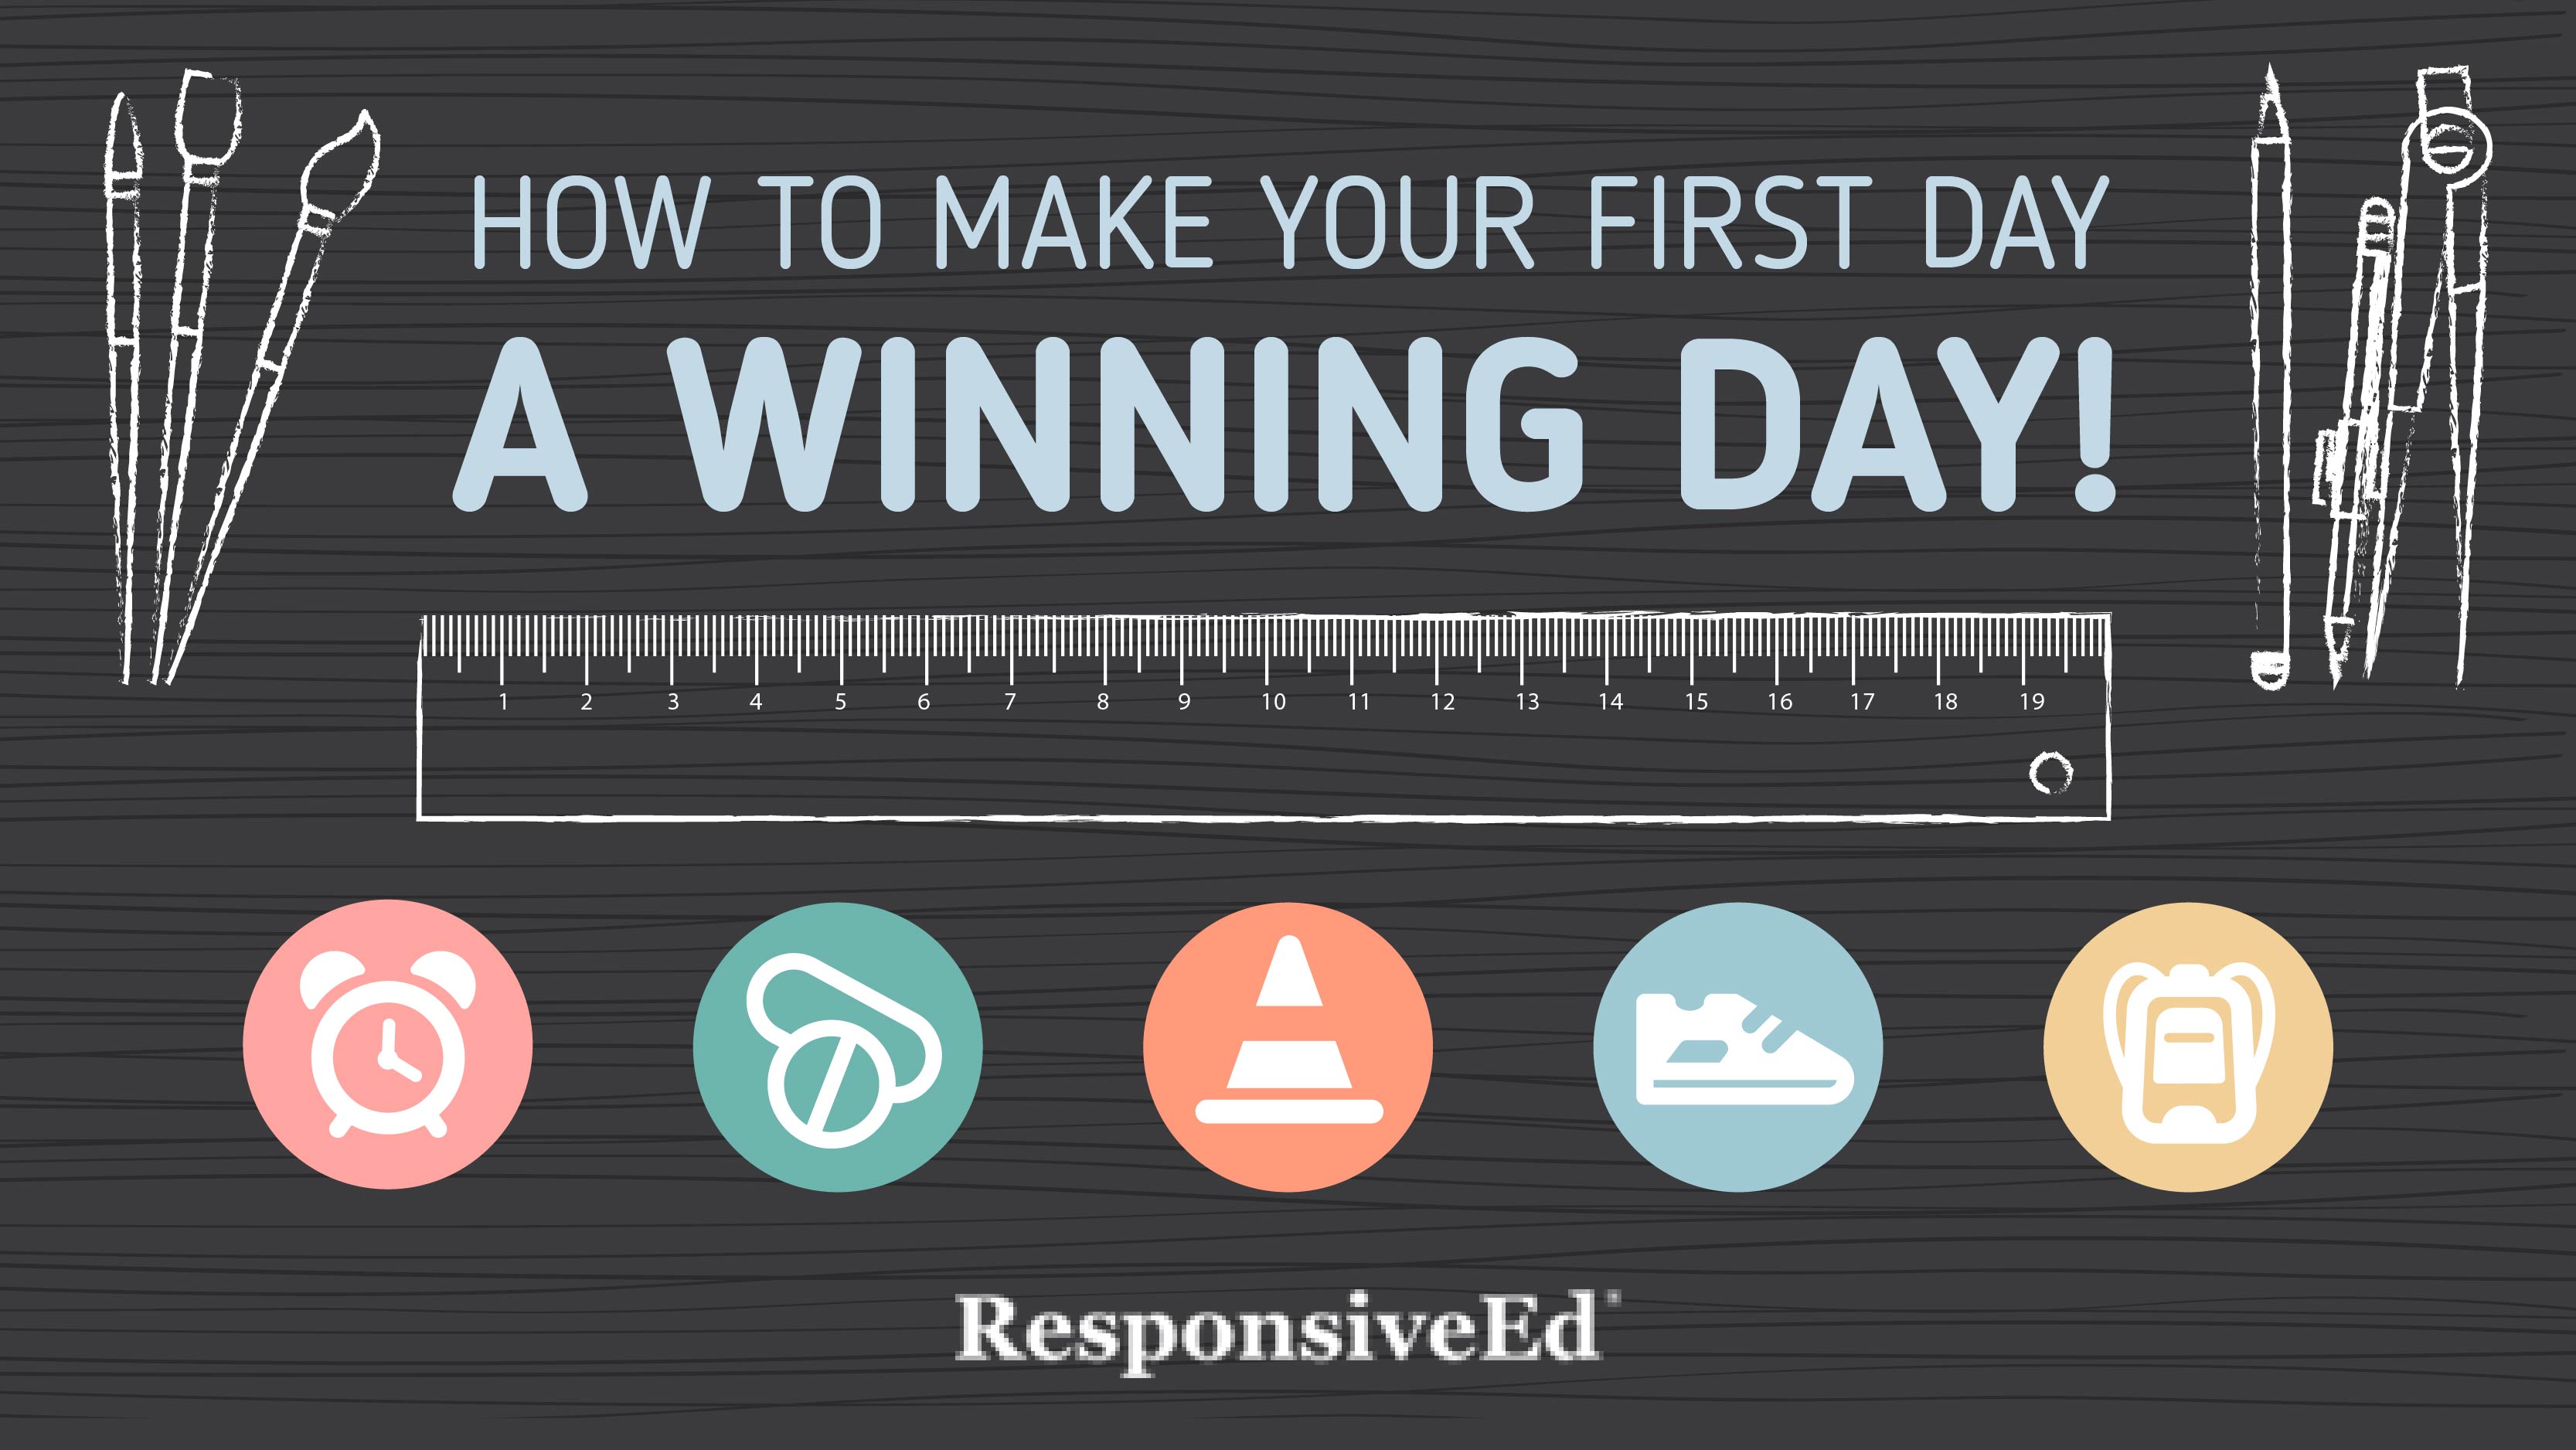 How to Make Your First Day a Winning Day